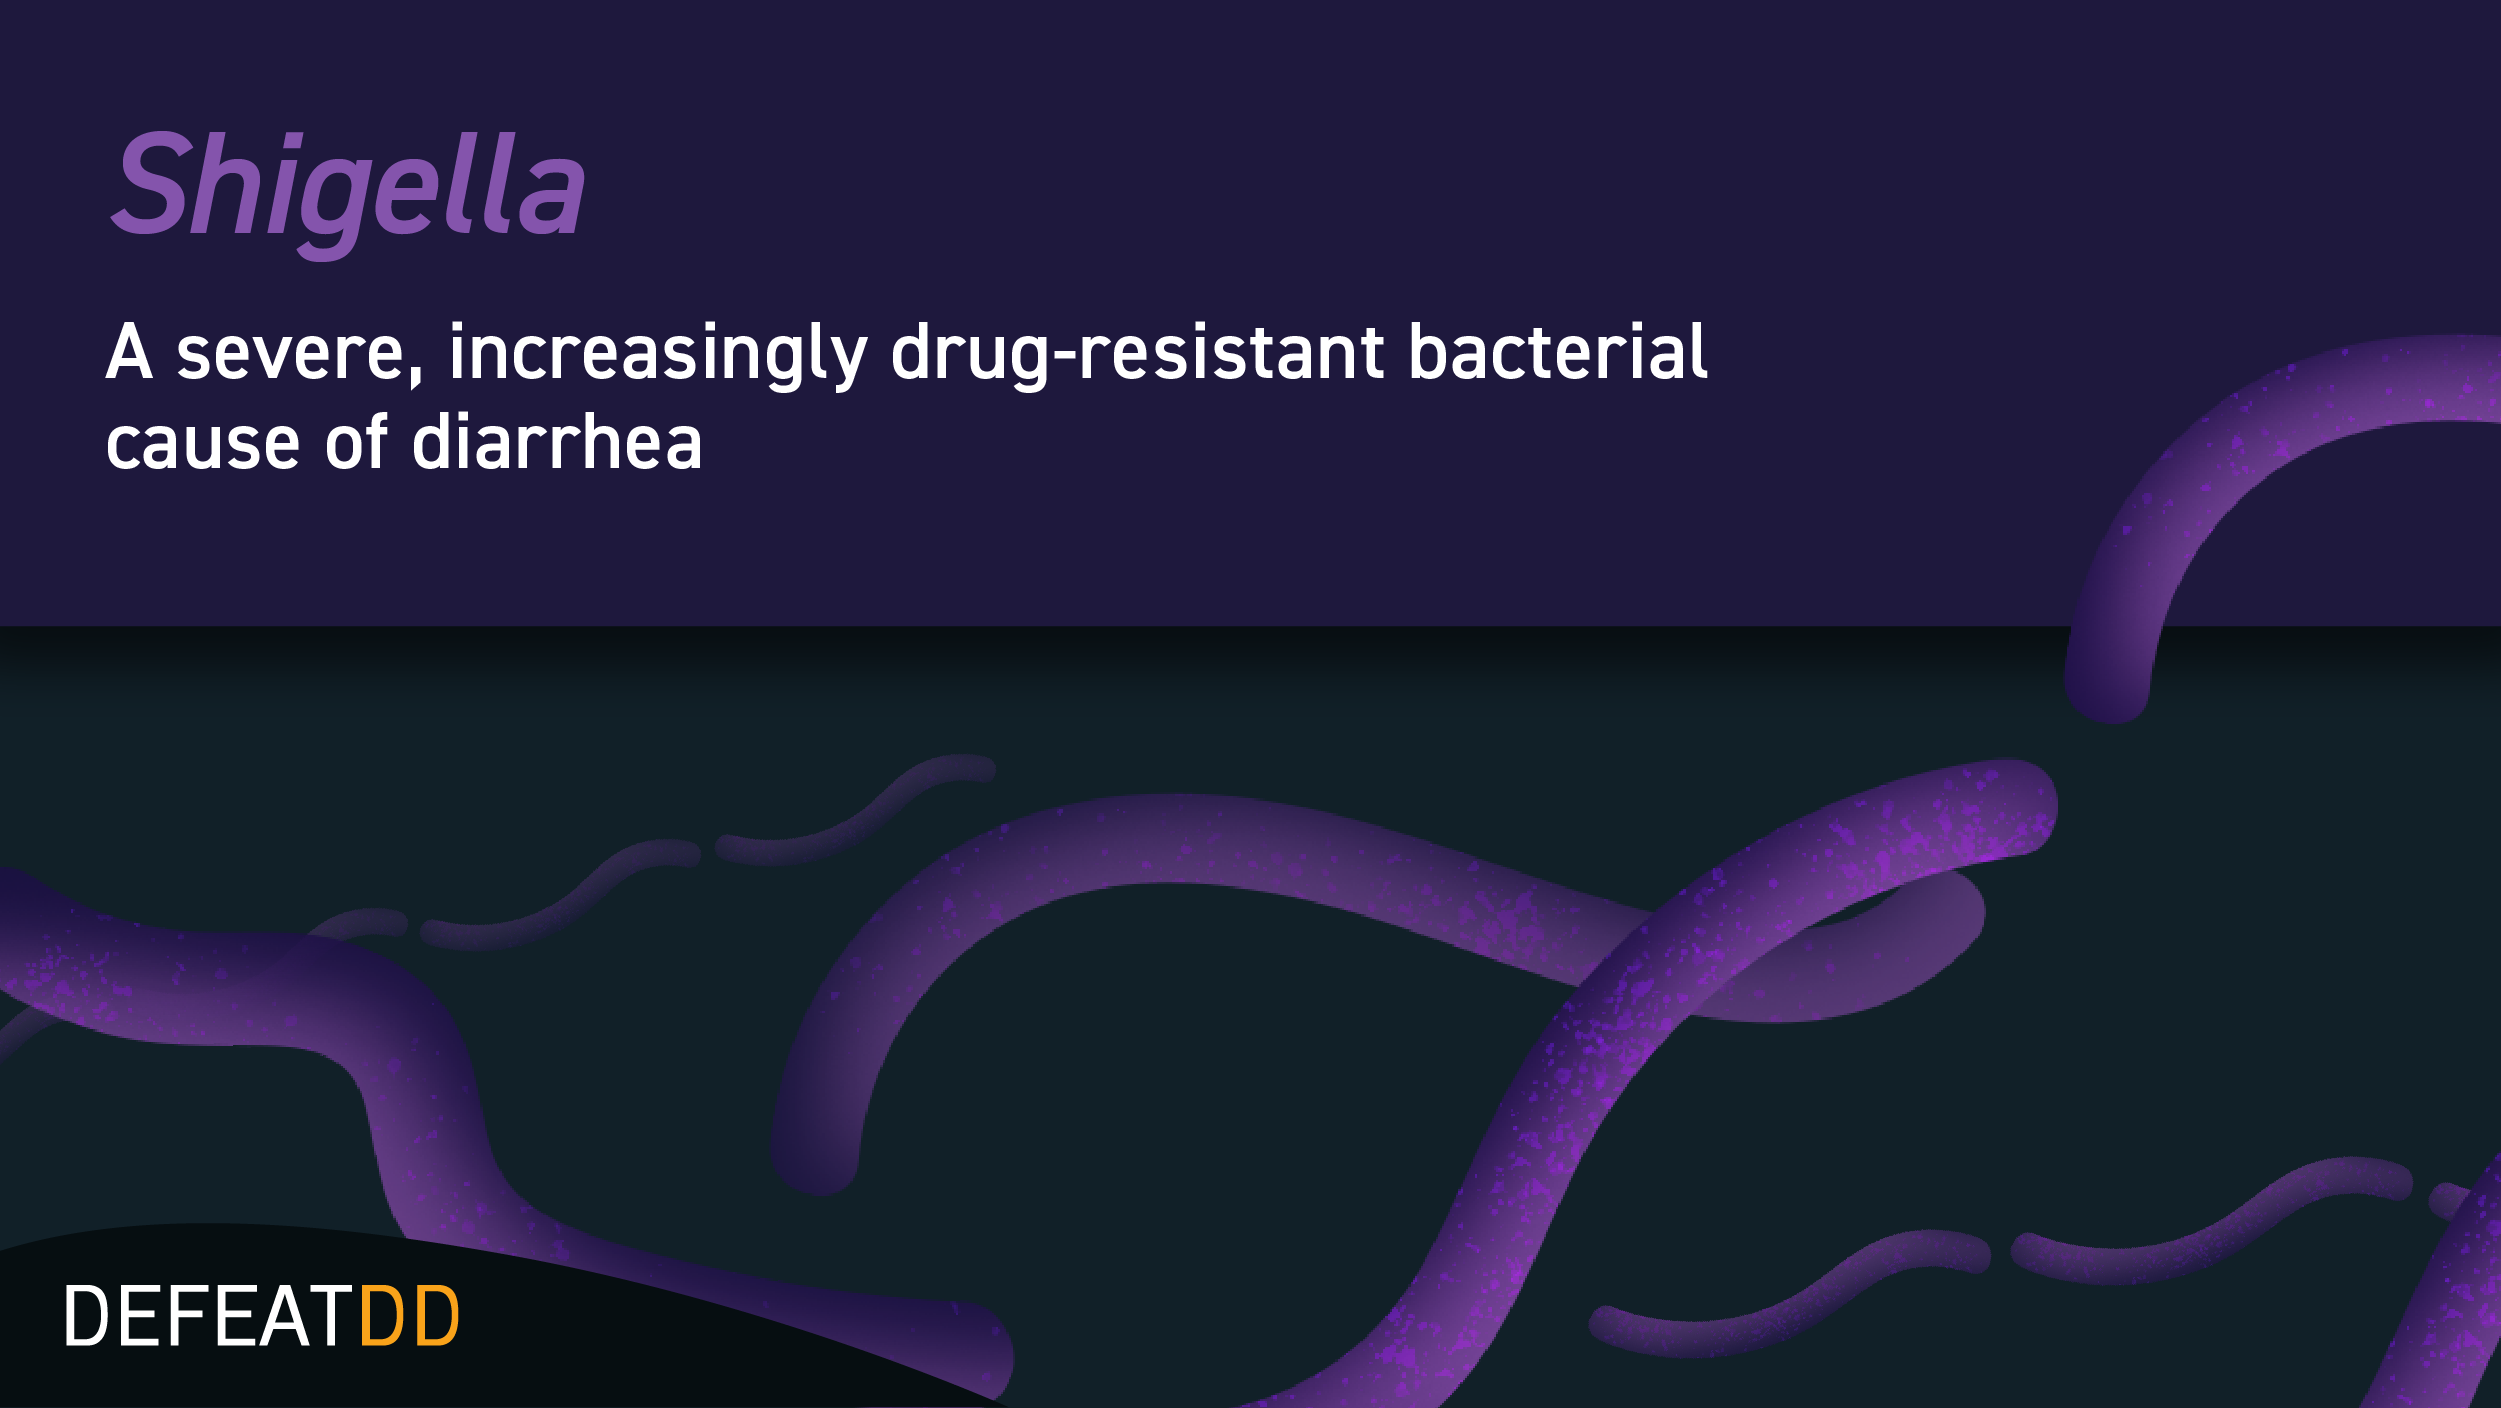 Graphic of shigella bacteria with text overlay that states, "Shigella: A severe, increasingly drug-resistant bacterial cause of diarrhea"